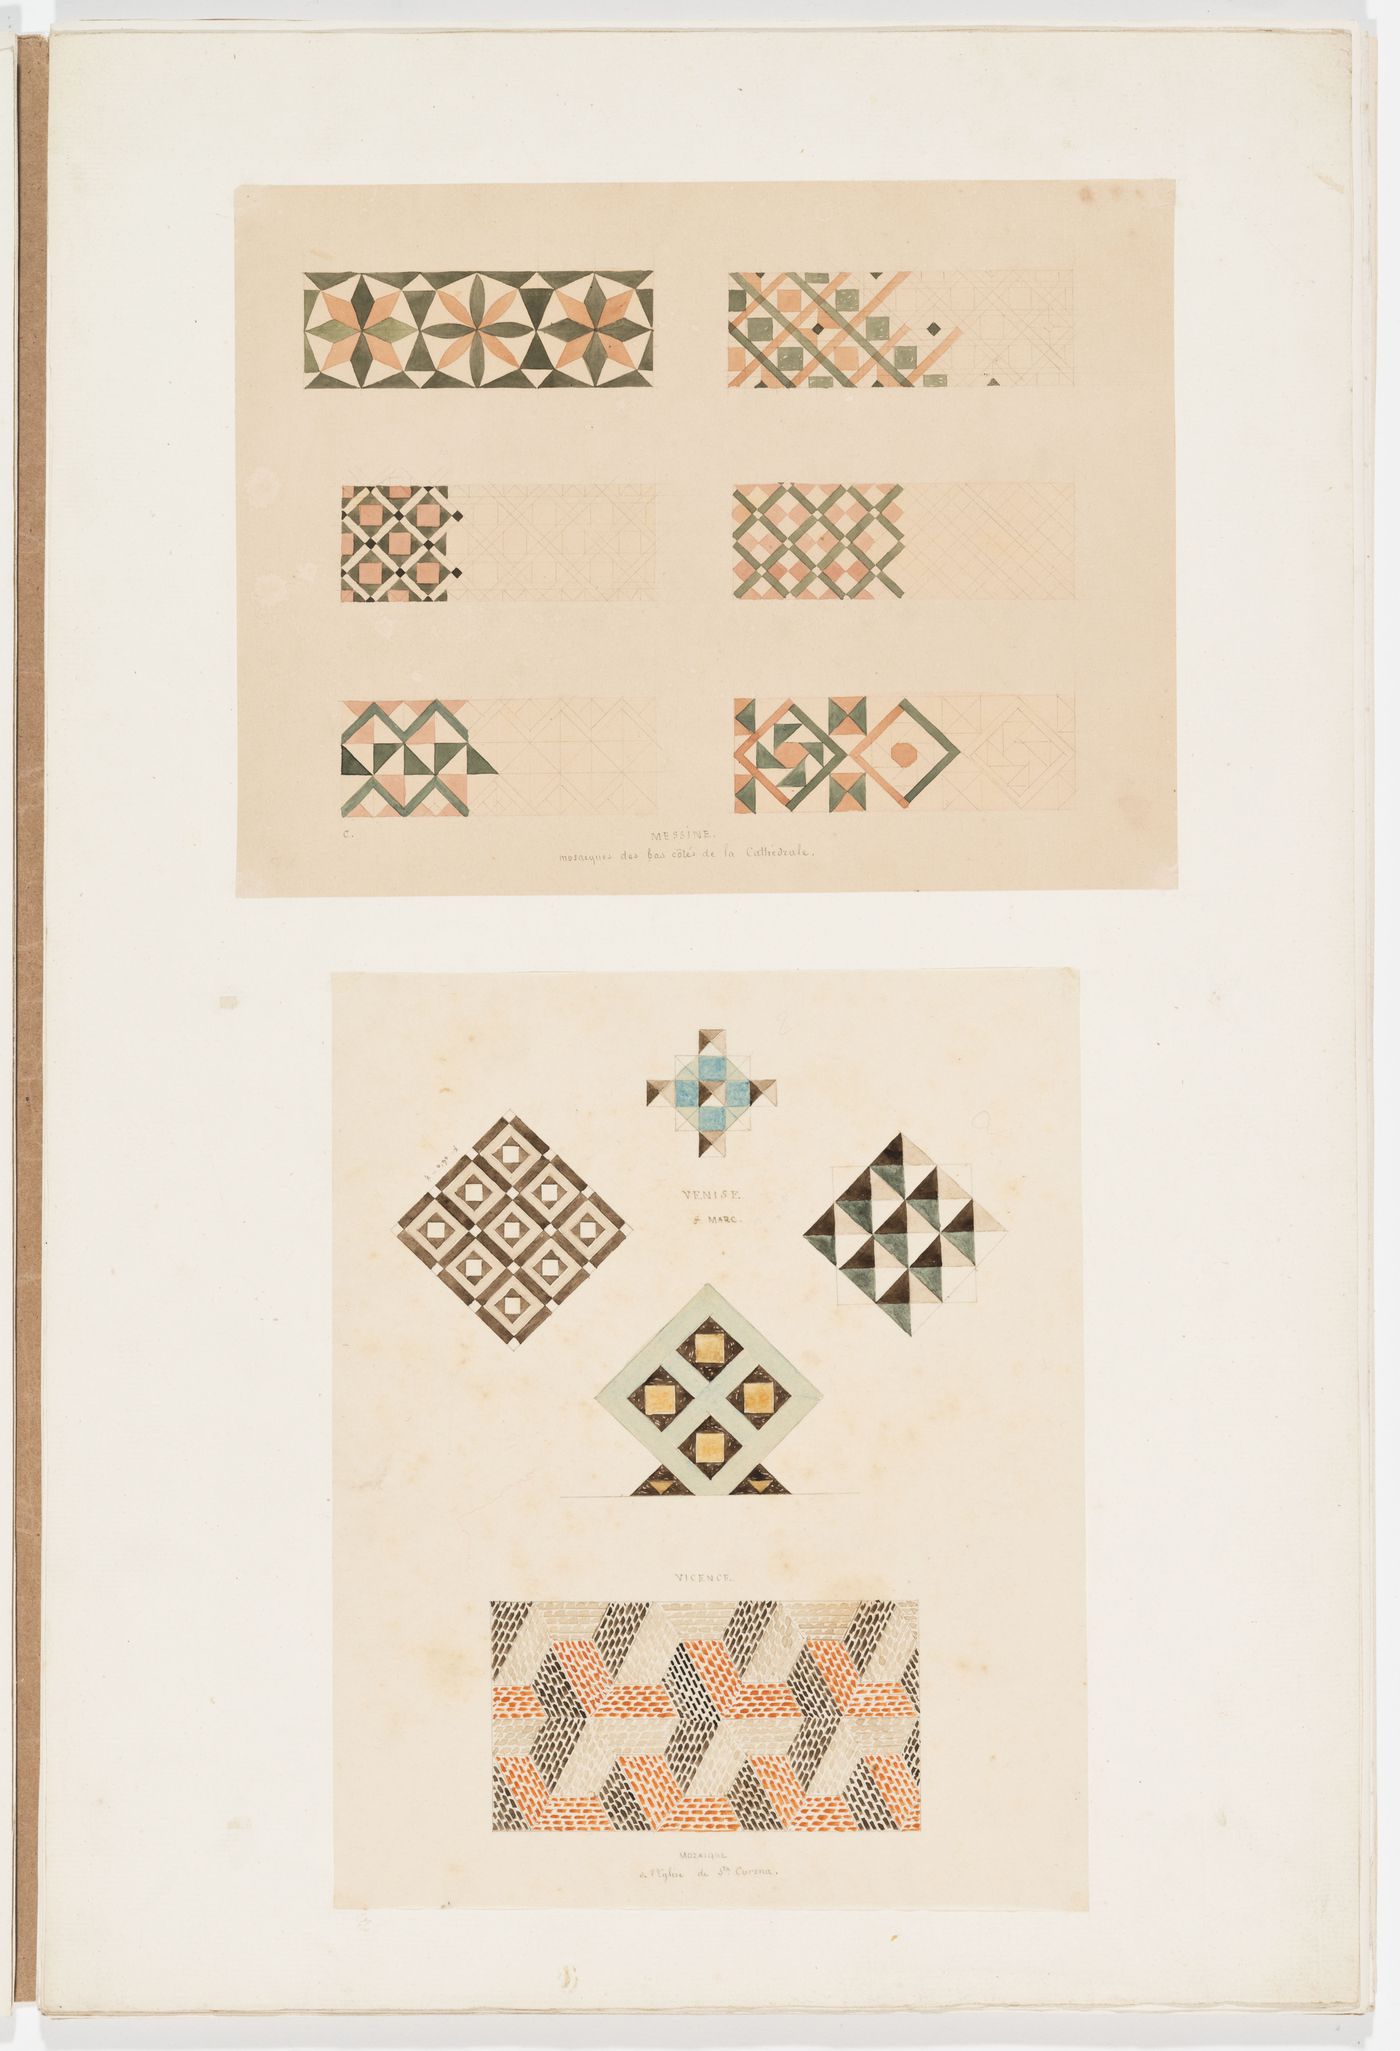 Ornament drawings of geometric patterns from San Marco, Venice, San Corona, Vicenza, and from the Cathedral of San Maria, Messina